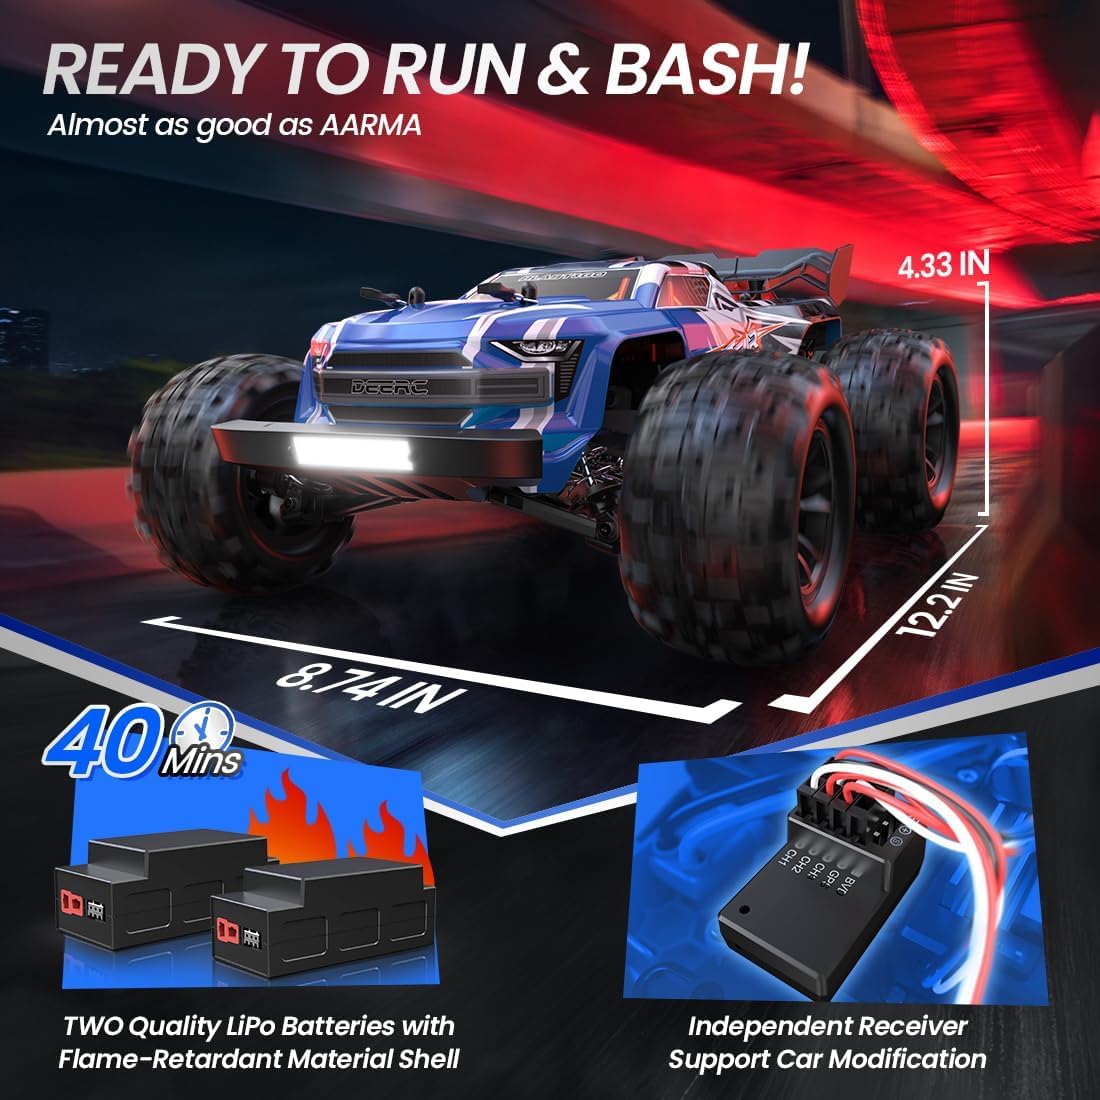 DEERC H16E Brushless Racing Remote Control Car 1:16 Scale 4X4 RC Monster Truck